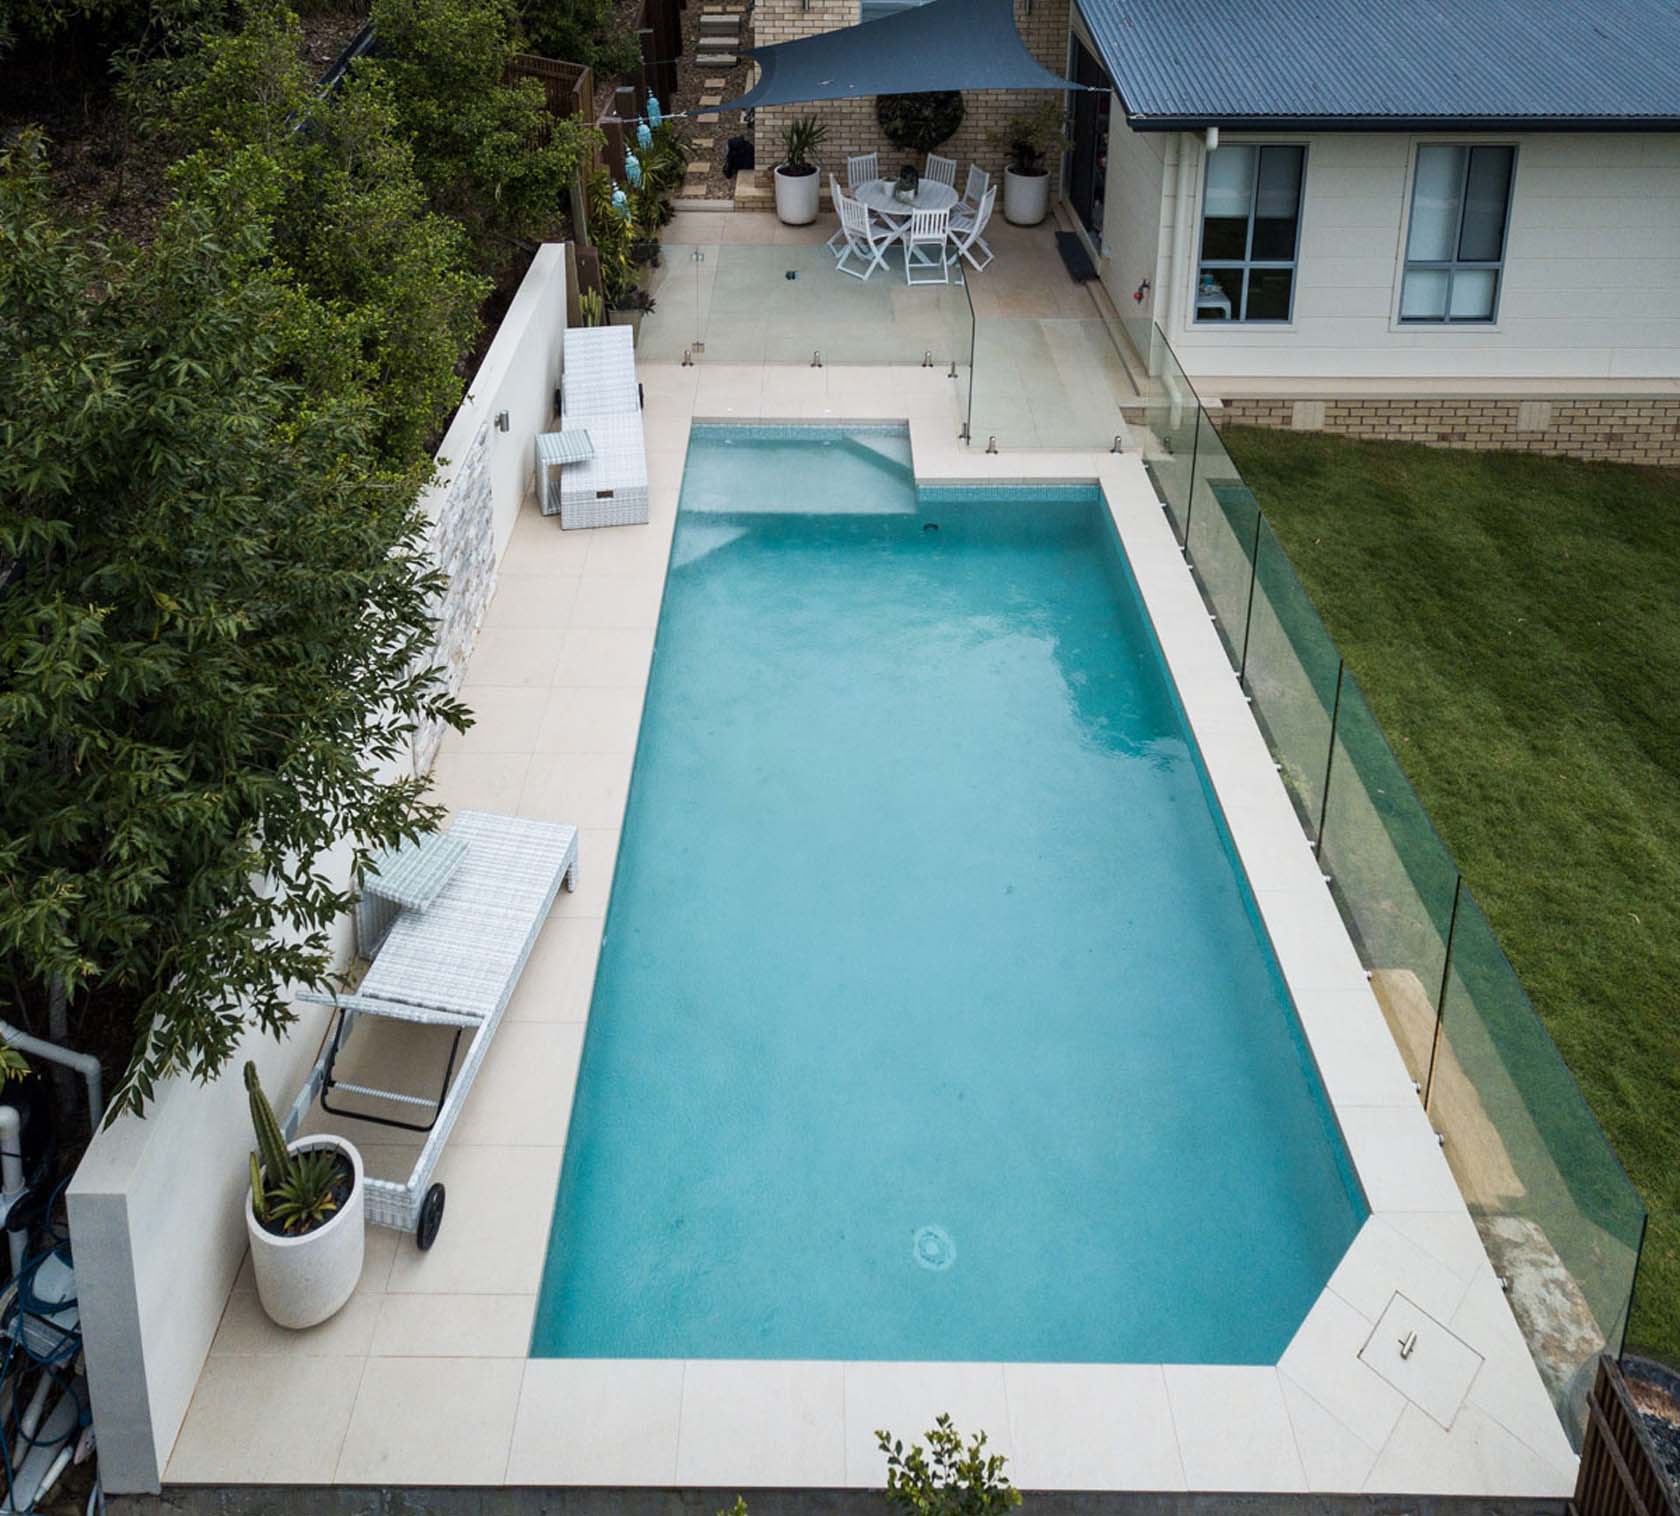 Pluto Porcelain pool coping and surrounds with Urban White Waterline tiles and Thredbo walling